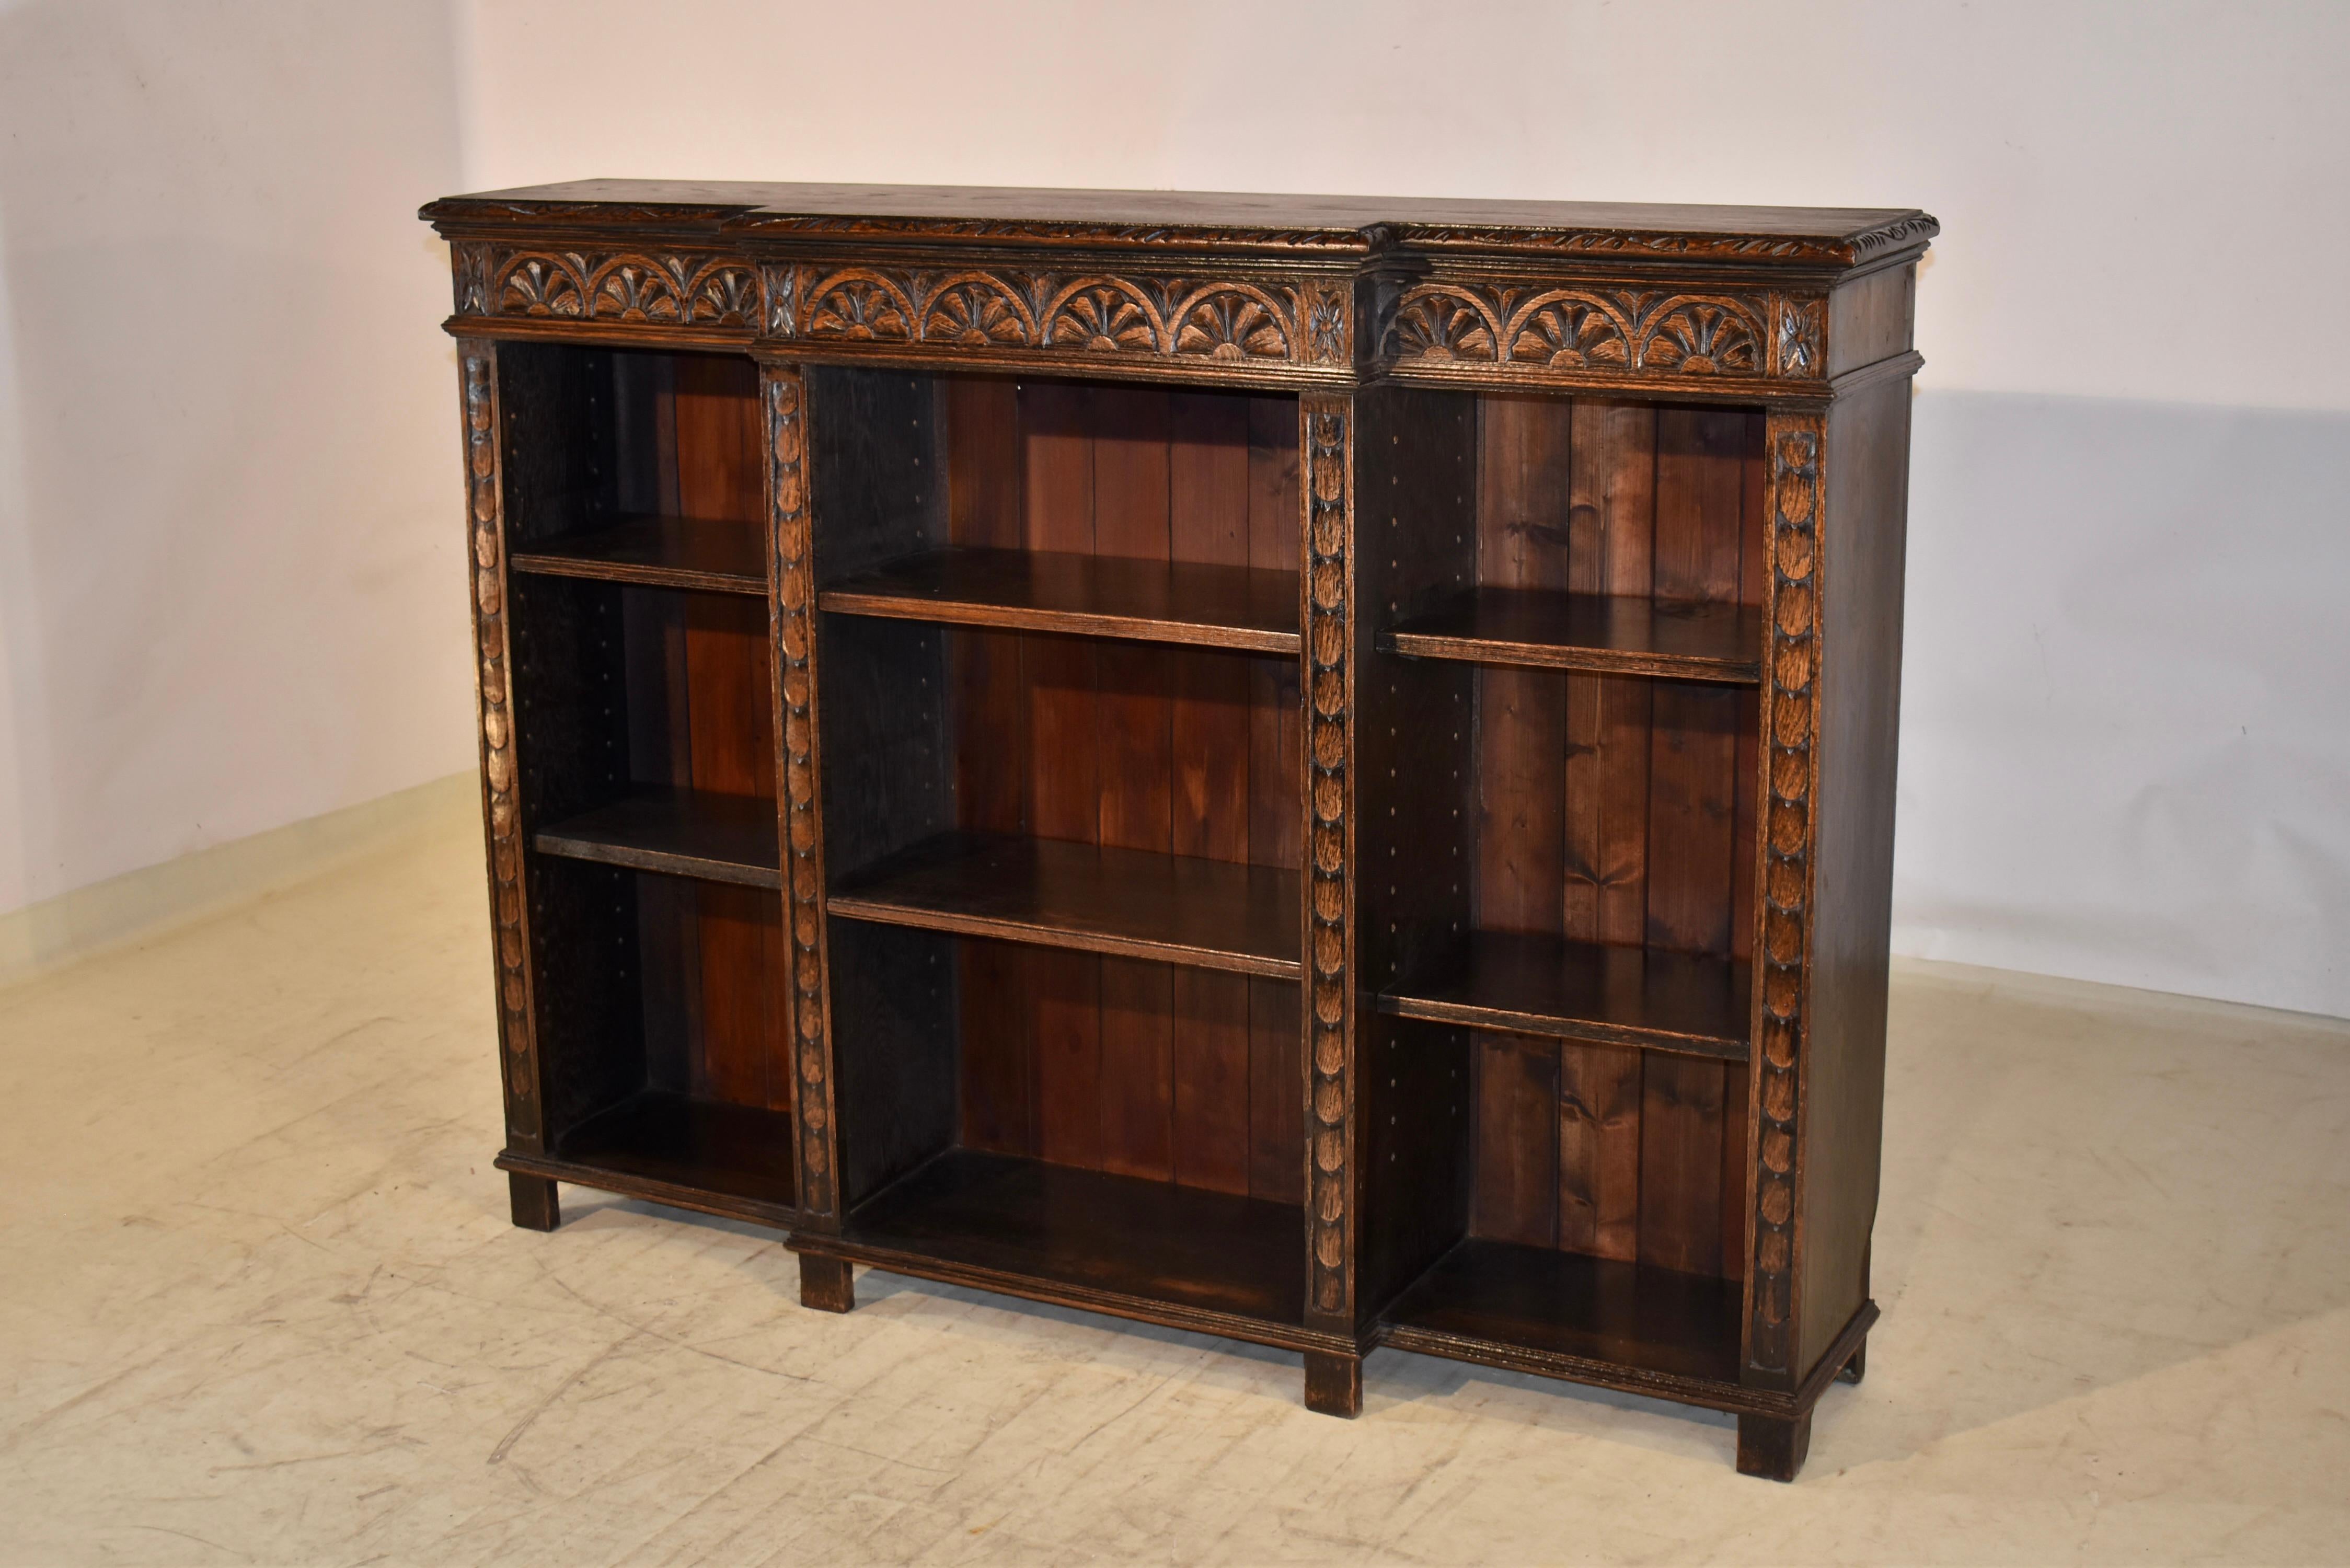 19th Century English Oak Breakfront Bookcase In Good Condition For Sale In High Point, NC